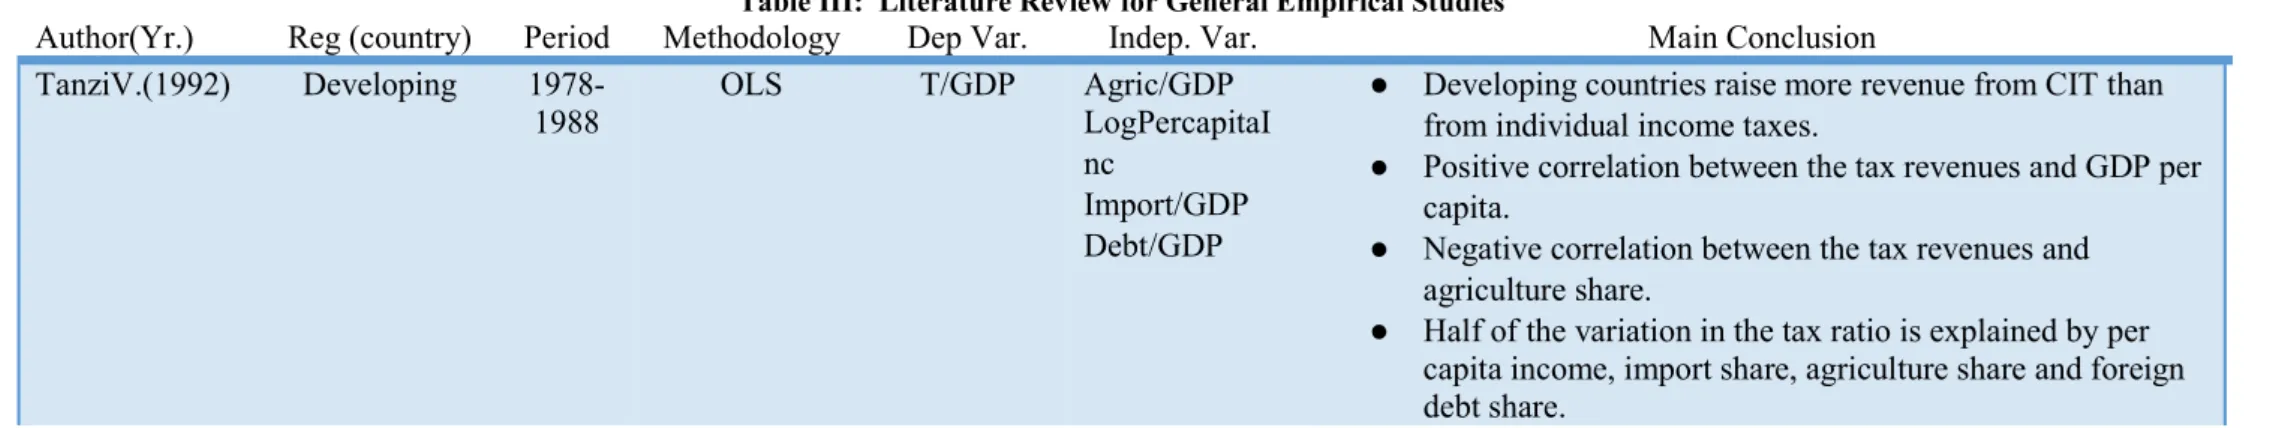 Table III:  Literature Review for General Empirical Studies 